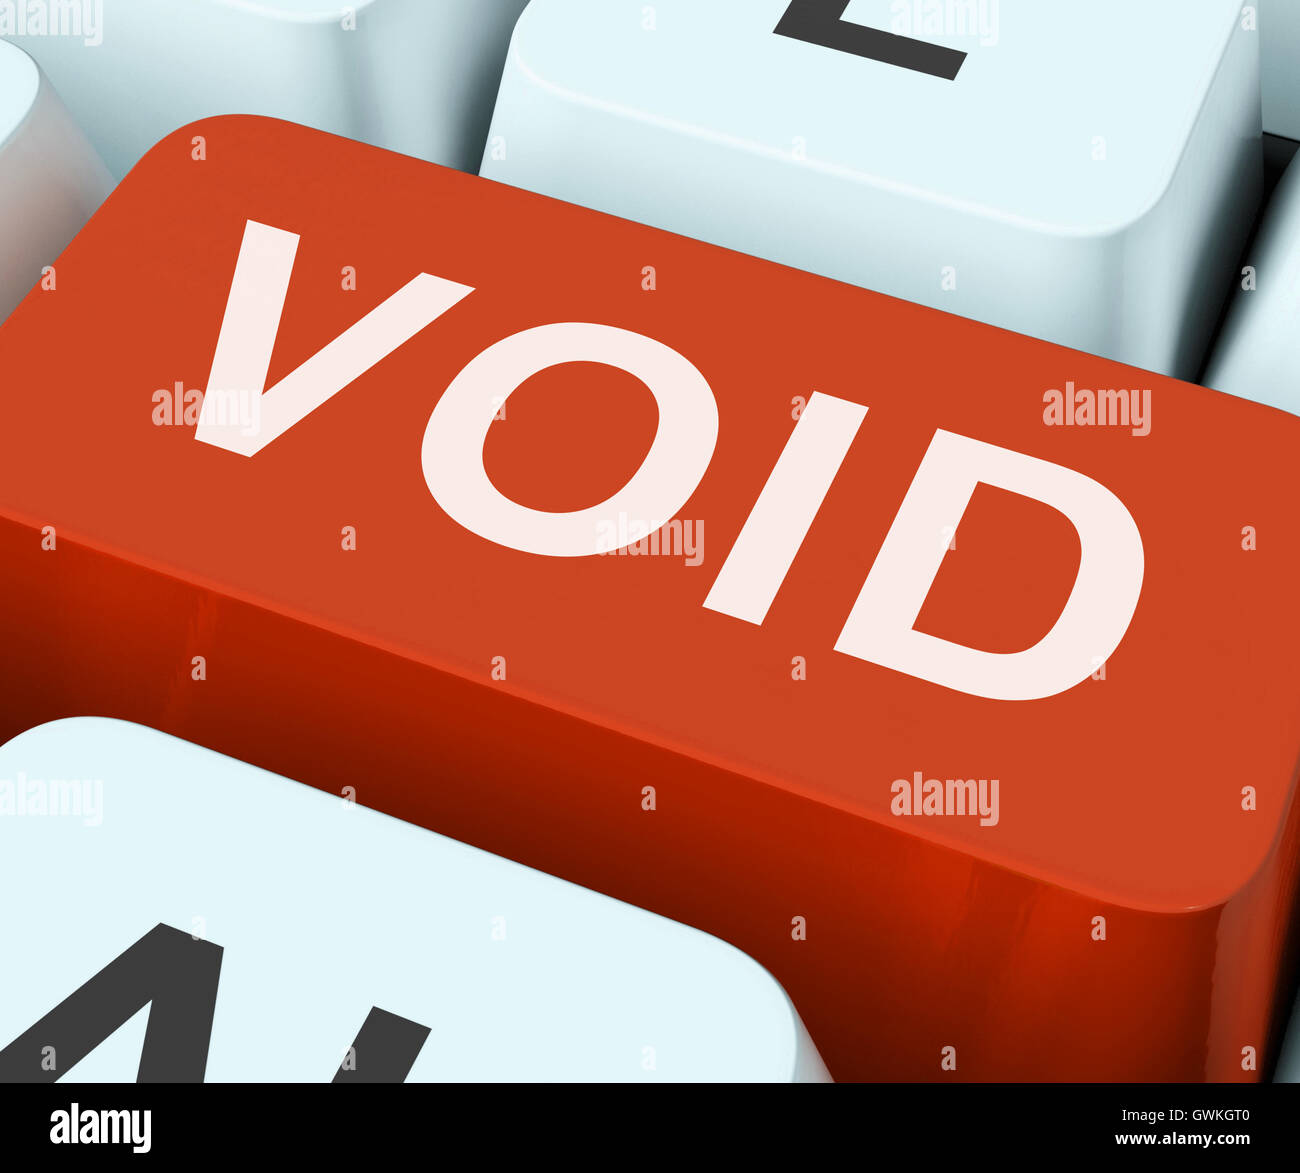 Void Key Shows Invalid Or Invalidated Contract Stock Photo